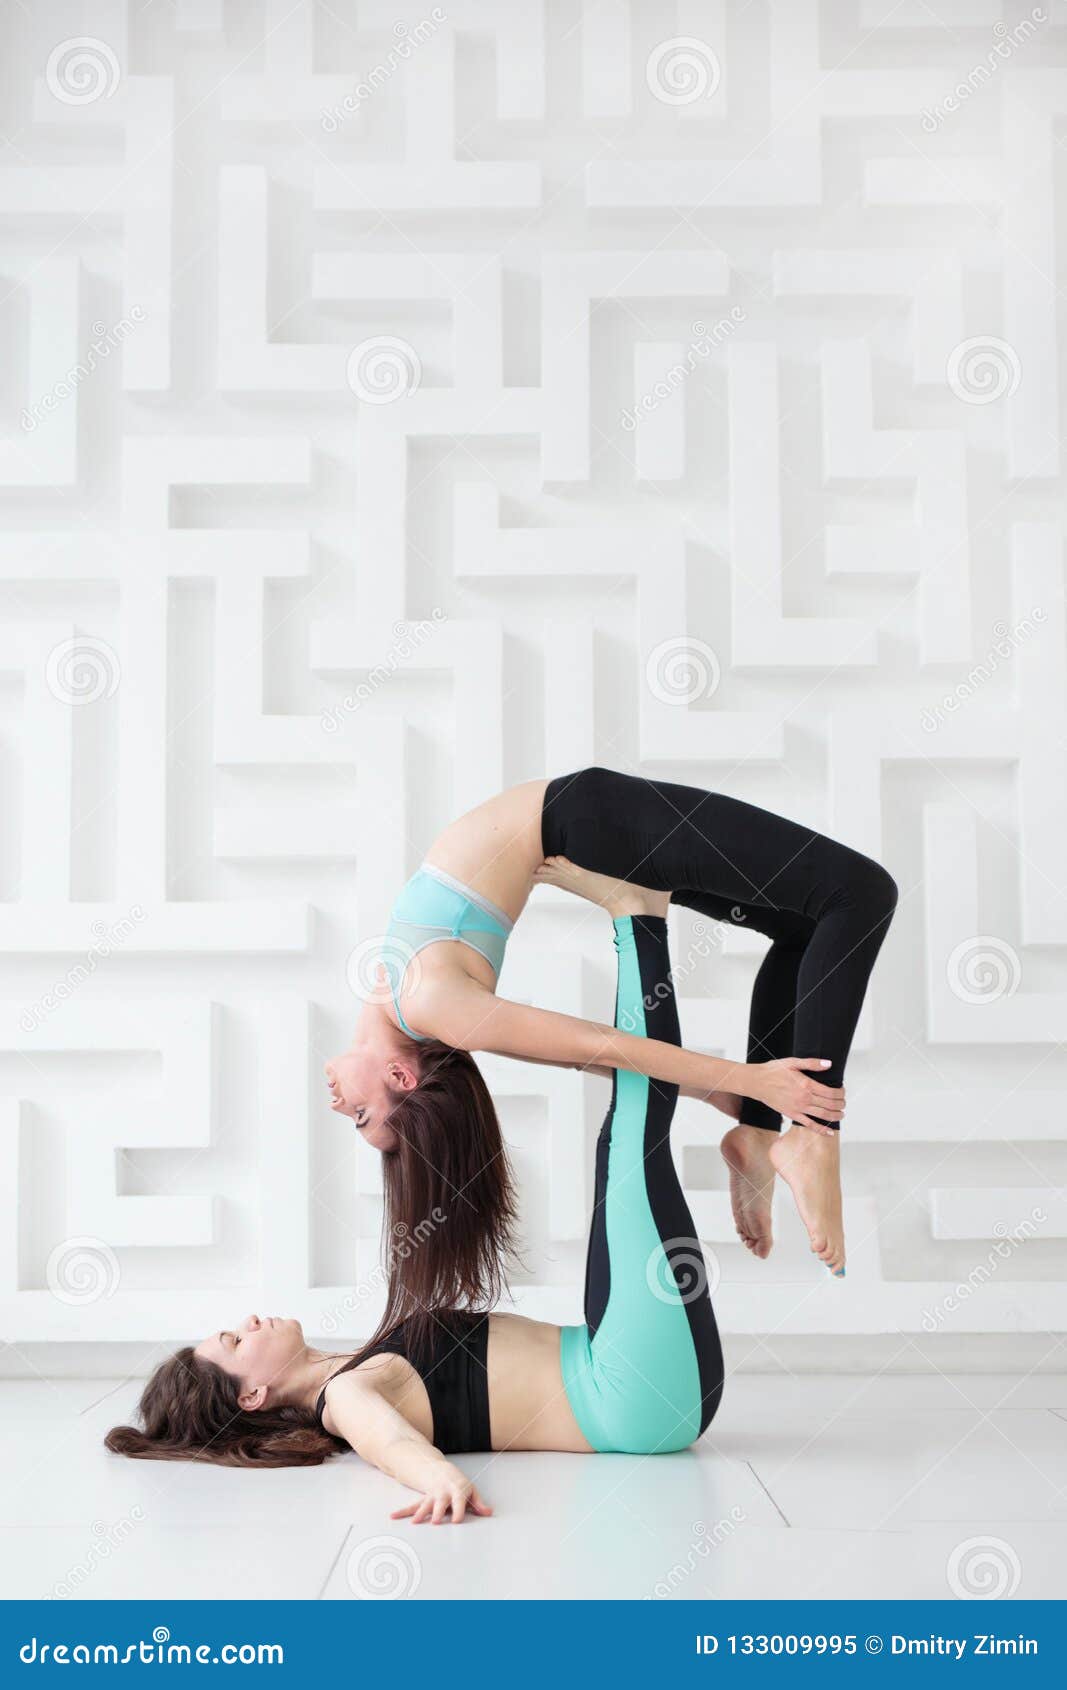 Two Young Caucasian Women Yogi Doing Balance Back Stretch Acro Yoga Pose.  Women Doing Stretching Workout In Park Outdoors At Sunset. Healthy  Lifestyle Modern Activity. Portrait Stock Photo, Picture and Royalty Free